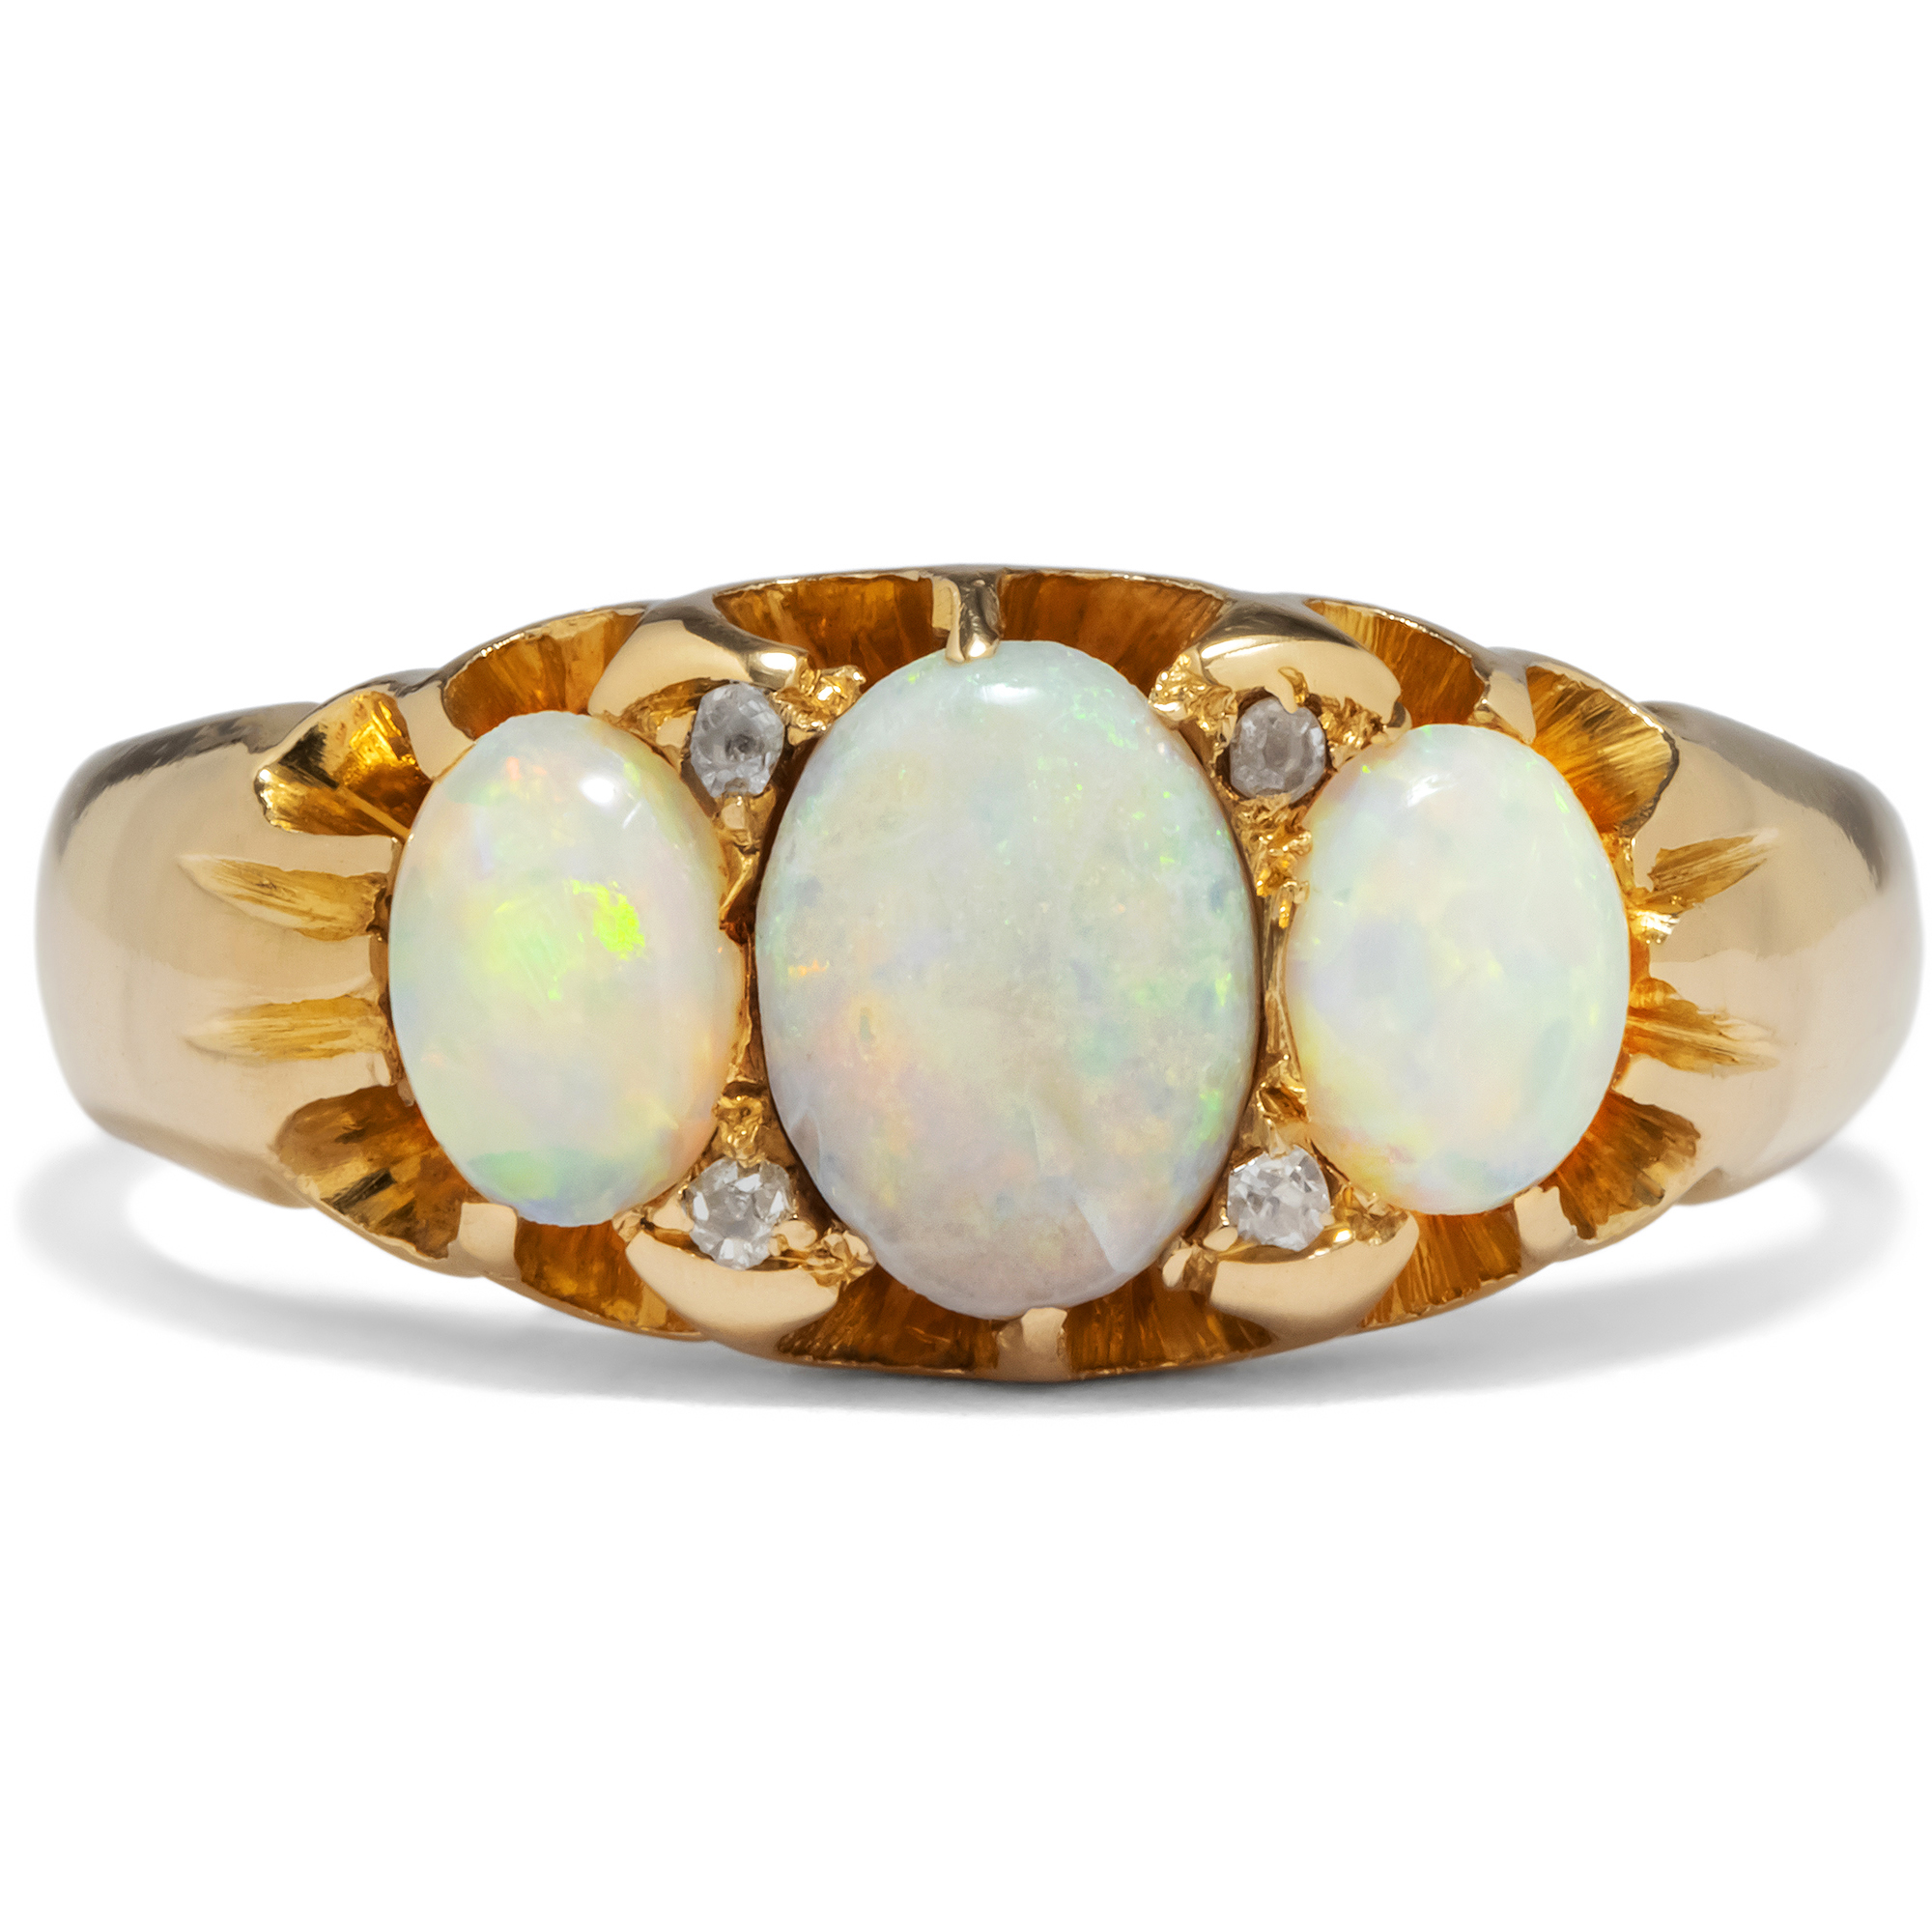 Antique Opal & Diamond Ring in Gold, England, dated 1901